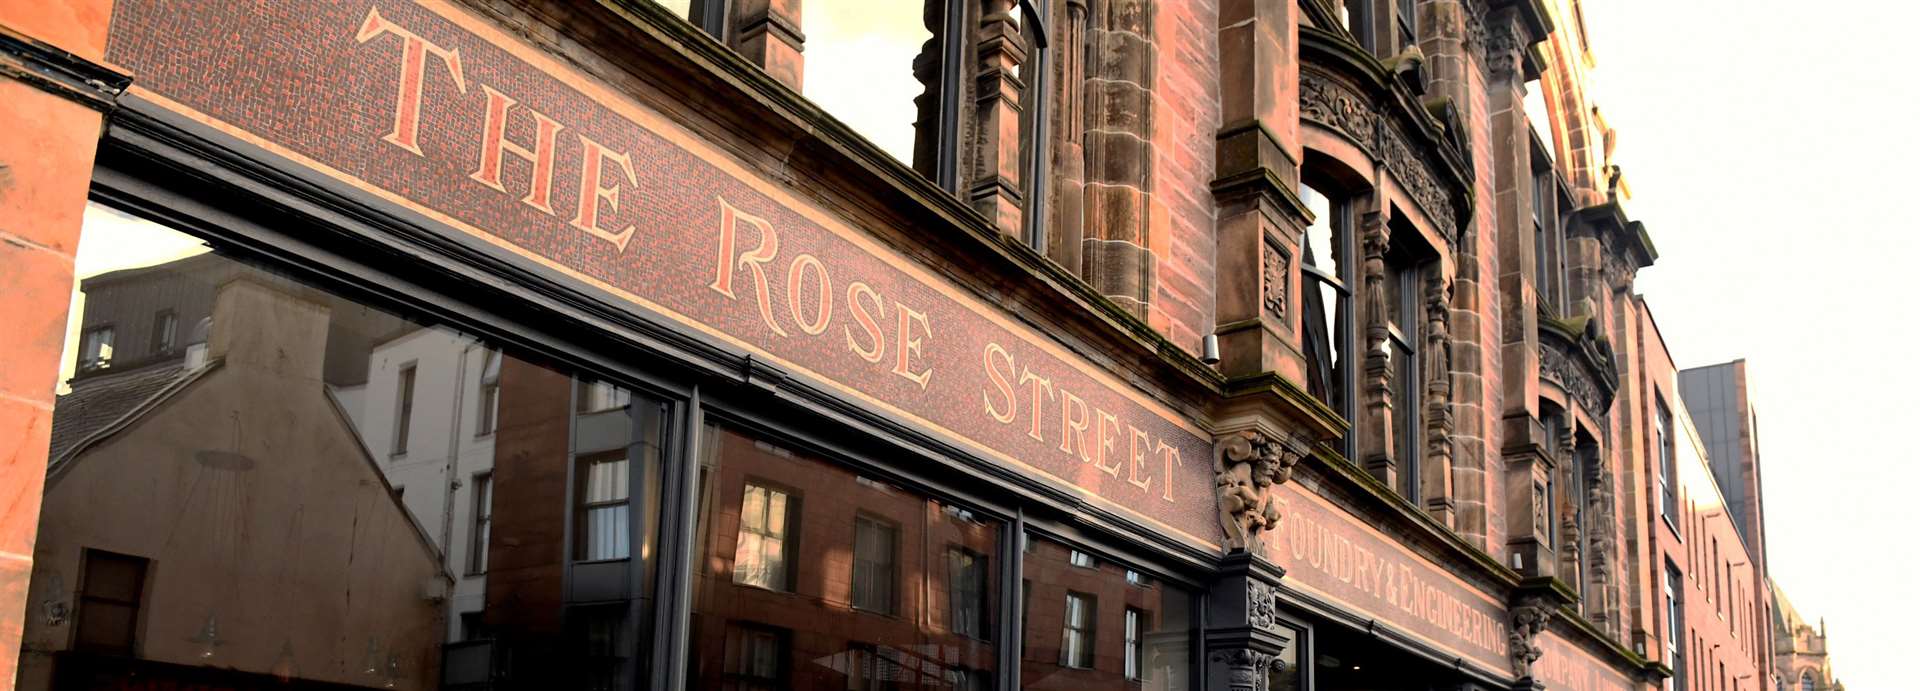 The Rose Street Foundry name above the door.